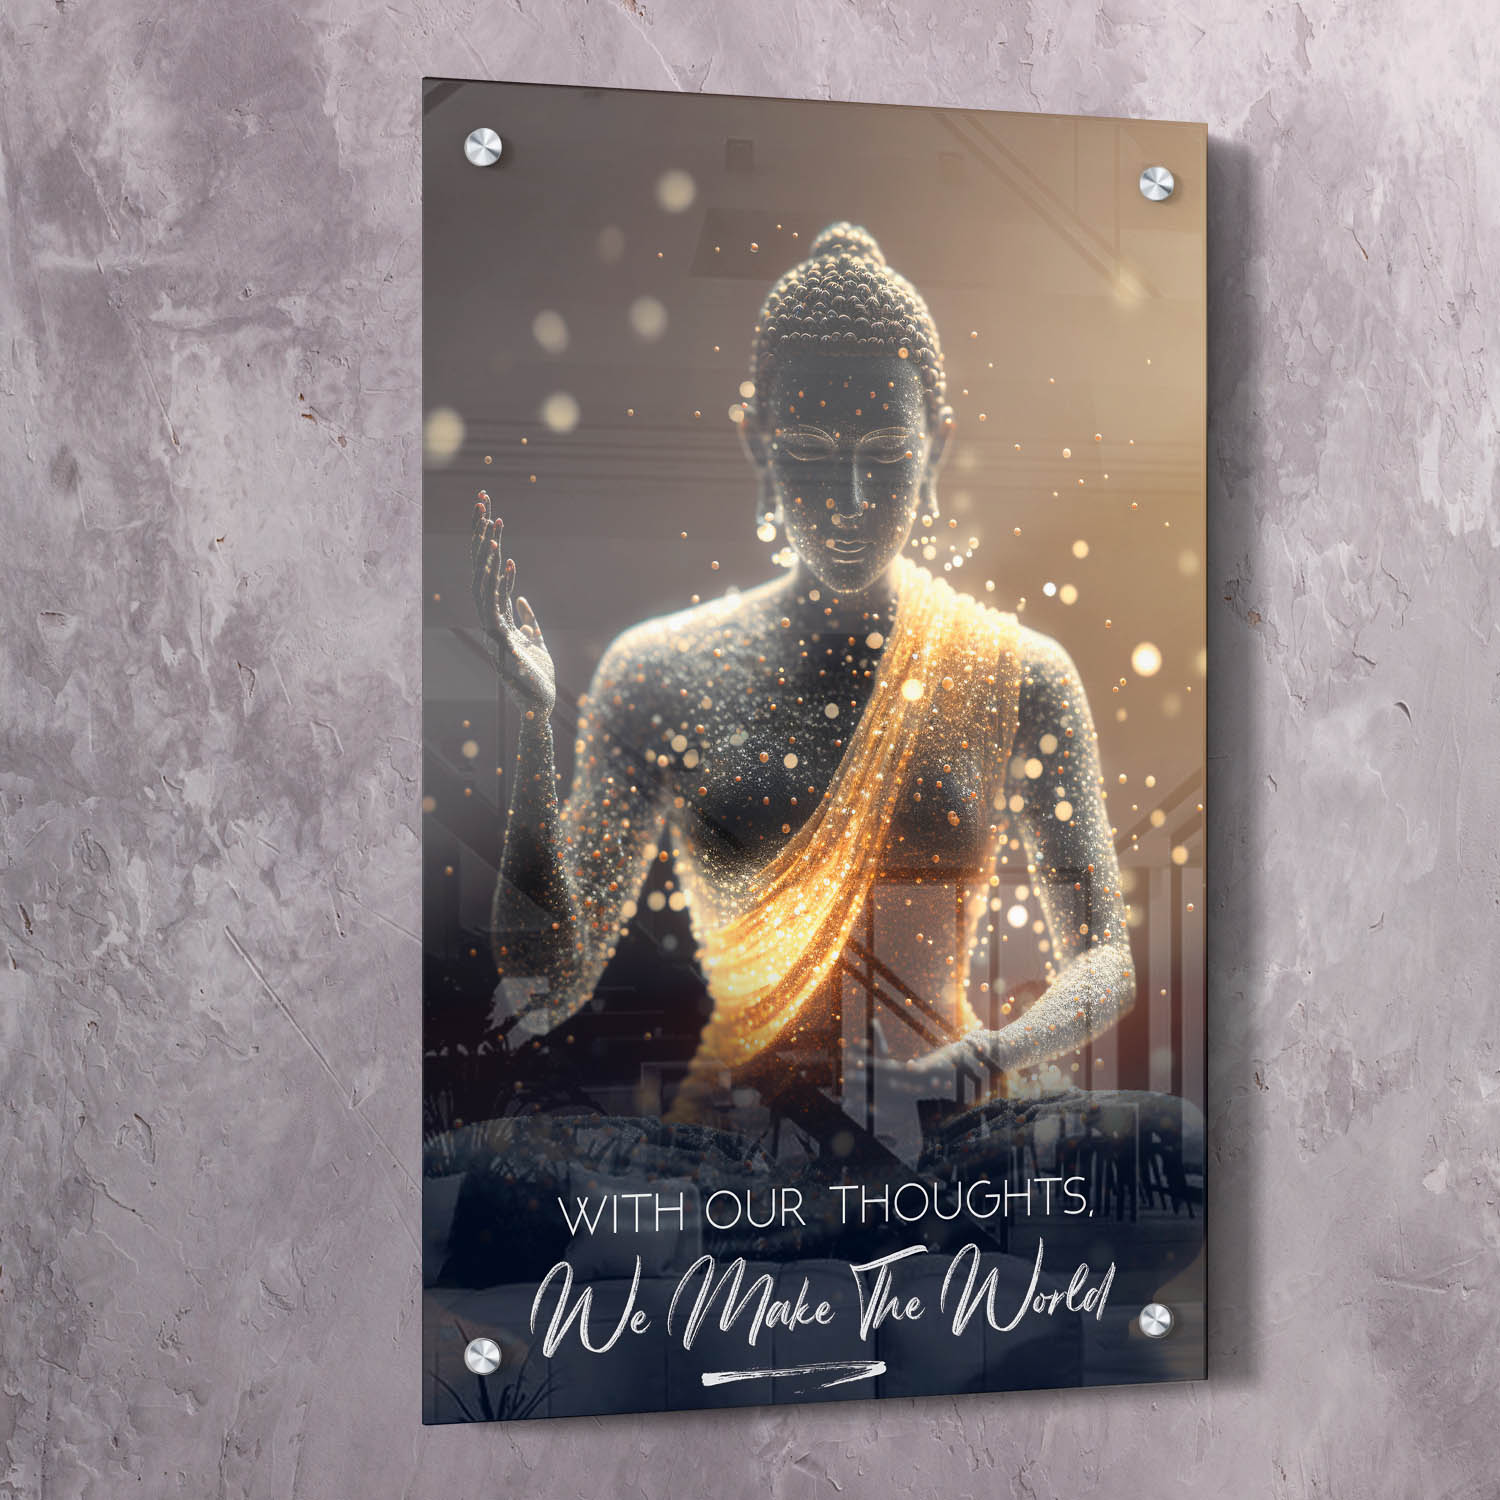 Buddha - With Our Thoughts Quote Wall Art | Inspirational Wall Art Motivational Wall Art Quotes Office Art | ImpaktMaker Exclusive Canvas Art Portrait